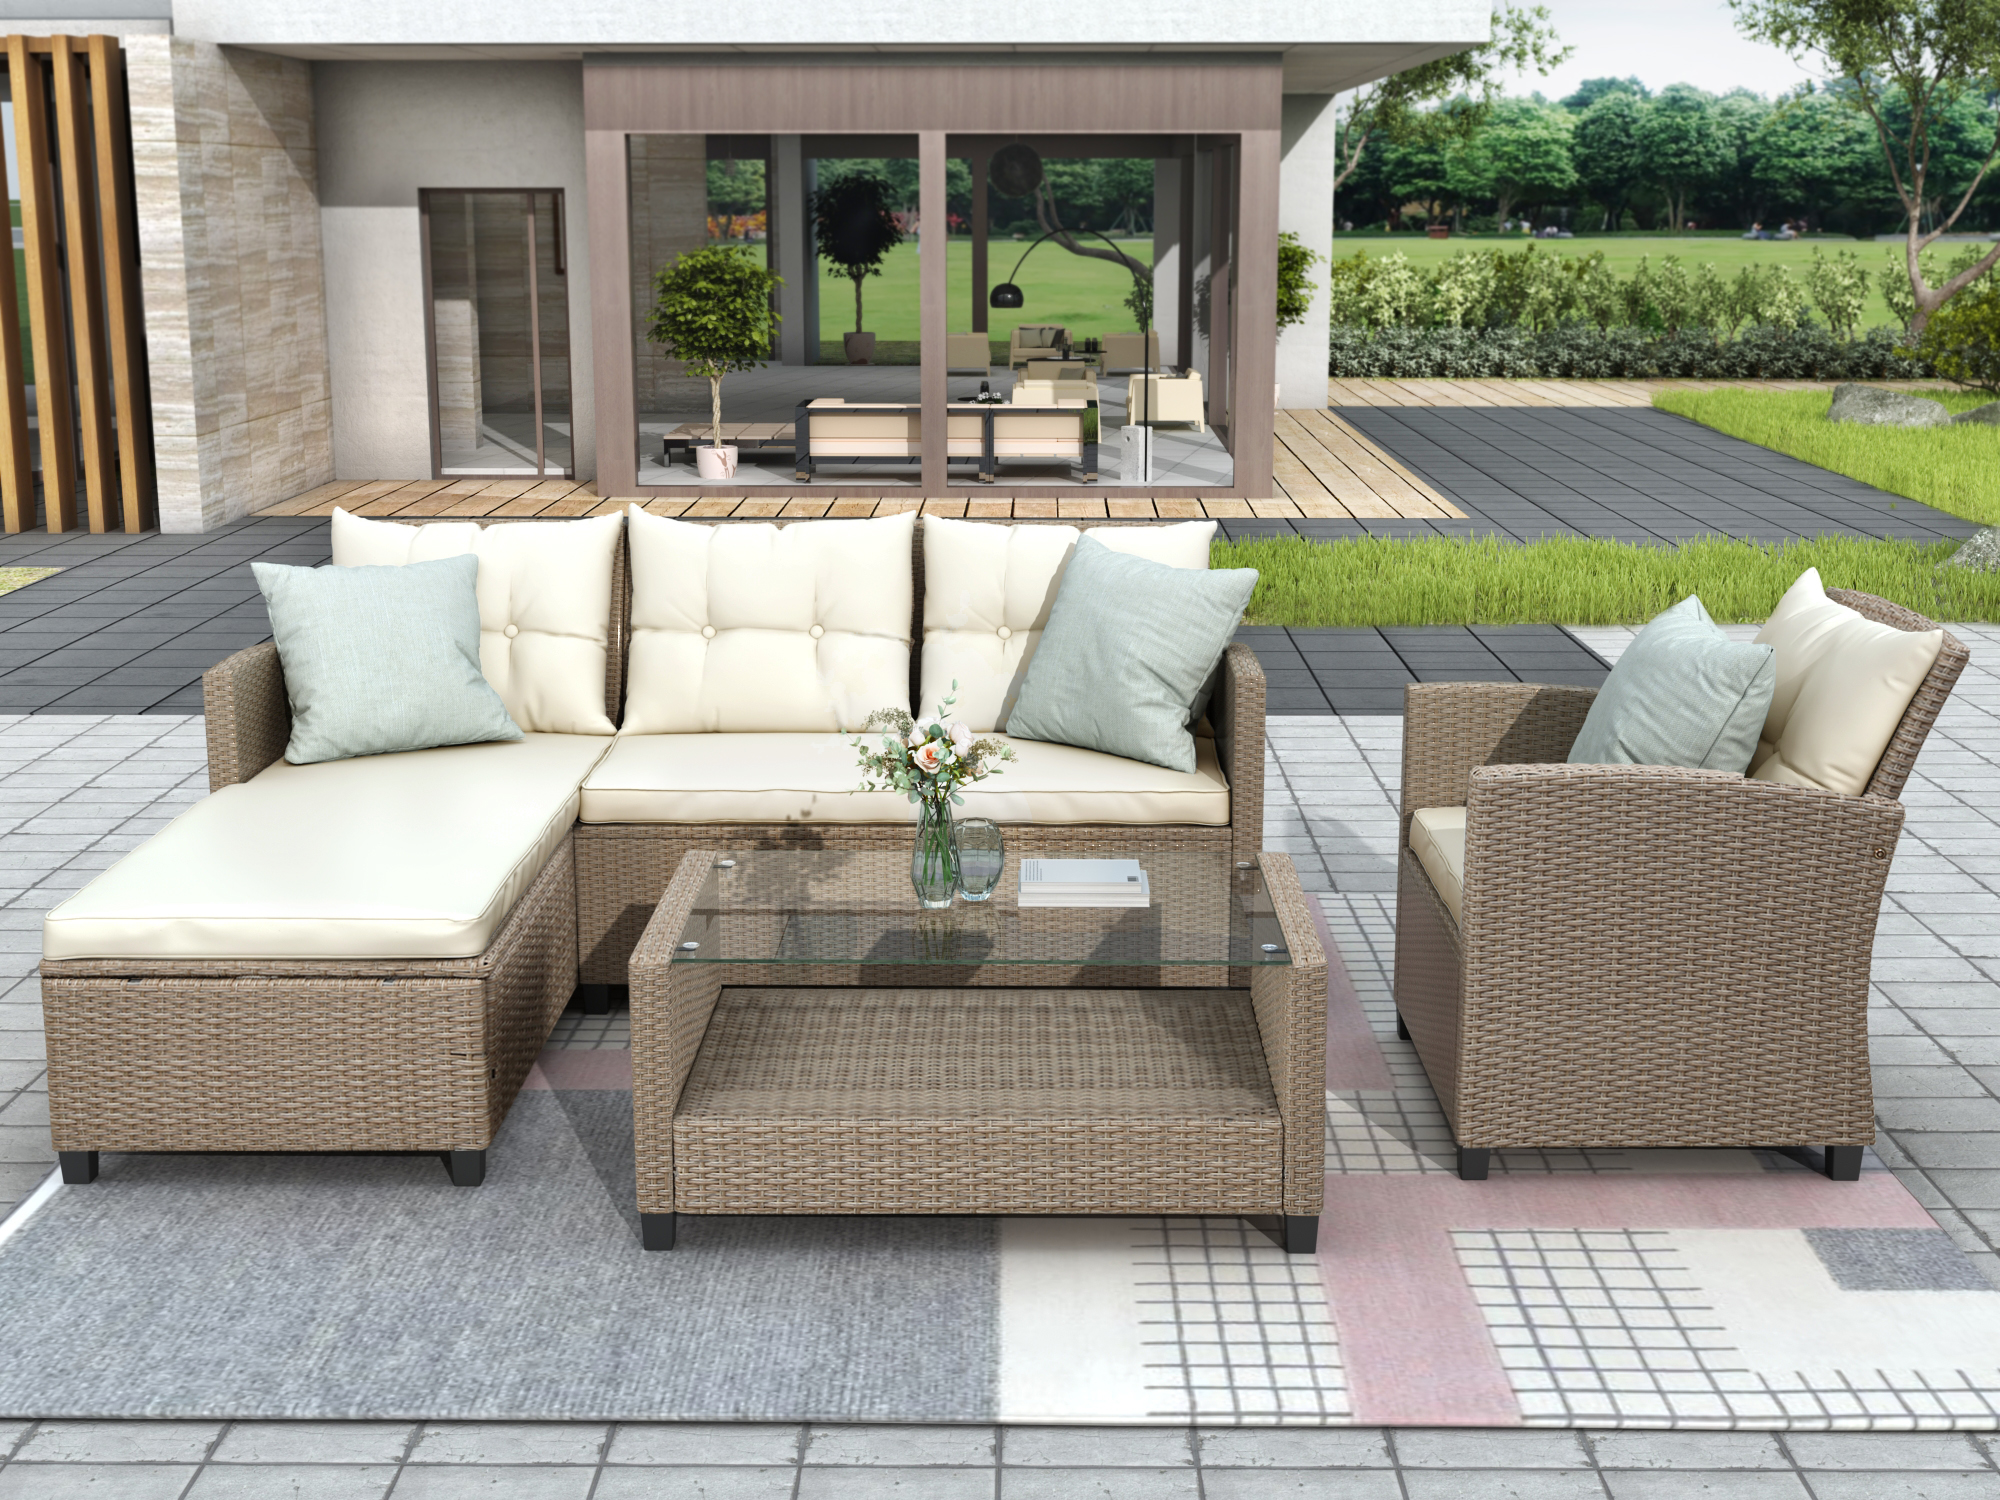 Wicker Sectional Table and Chairs Sets, 4 Pieces Outdoor Wicker Patio Furniture Set with Sectional L-Shaped Chaise Longue, Armchair, Tempered Glass Table, Cushions, for Porch Backyard Garden, S8534 - image 1 of 8